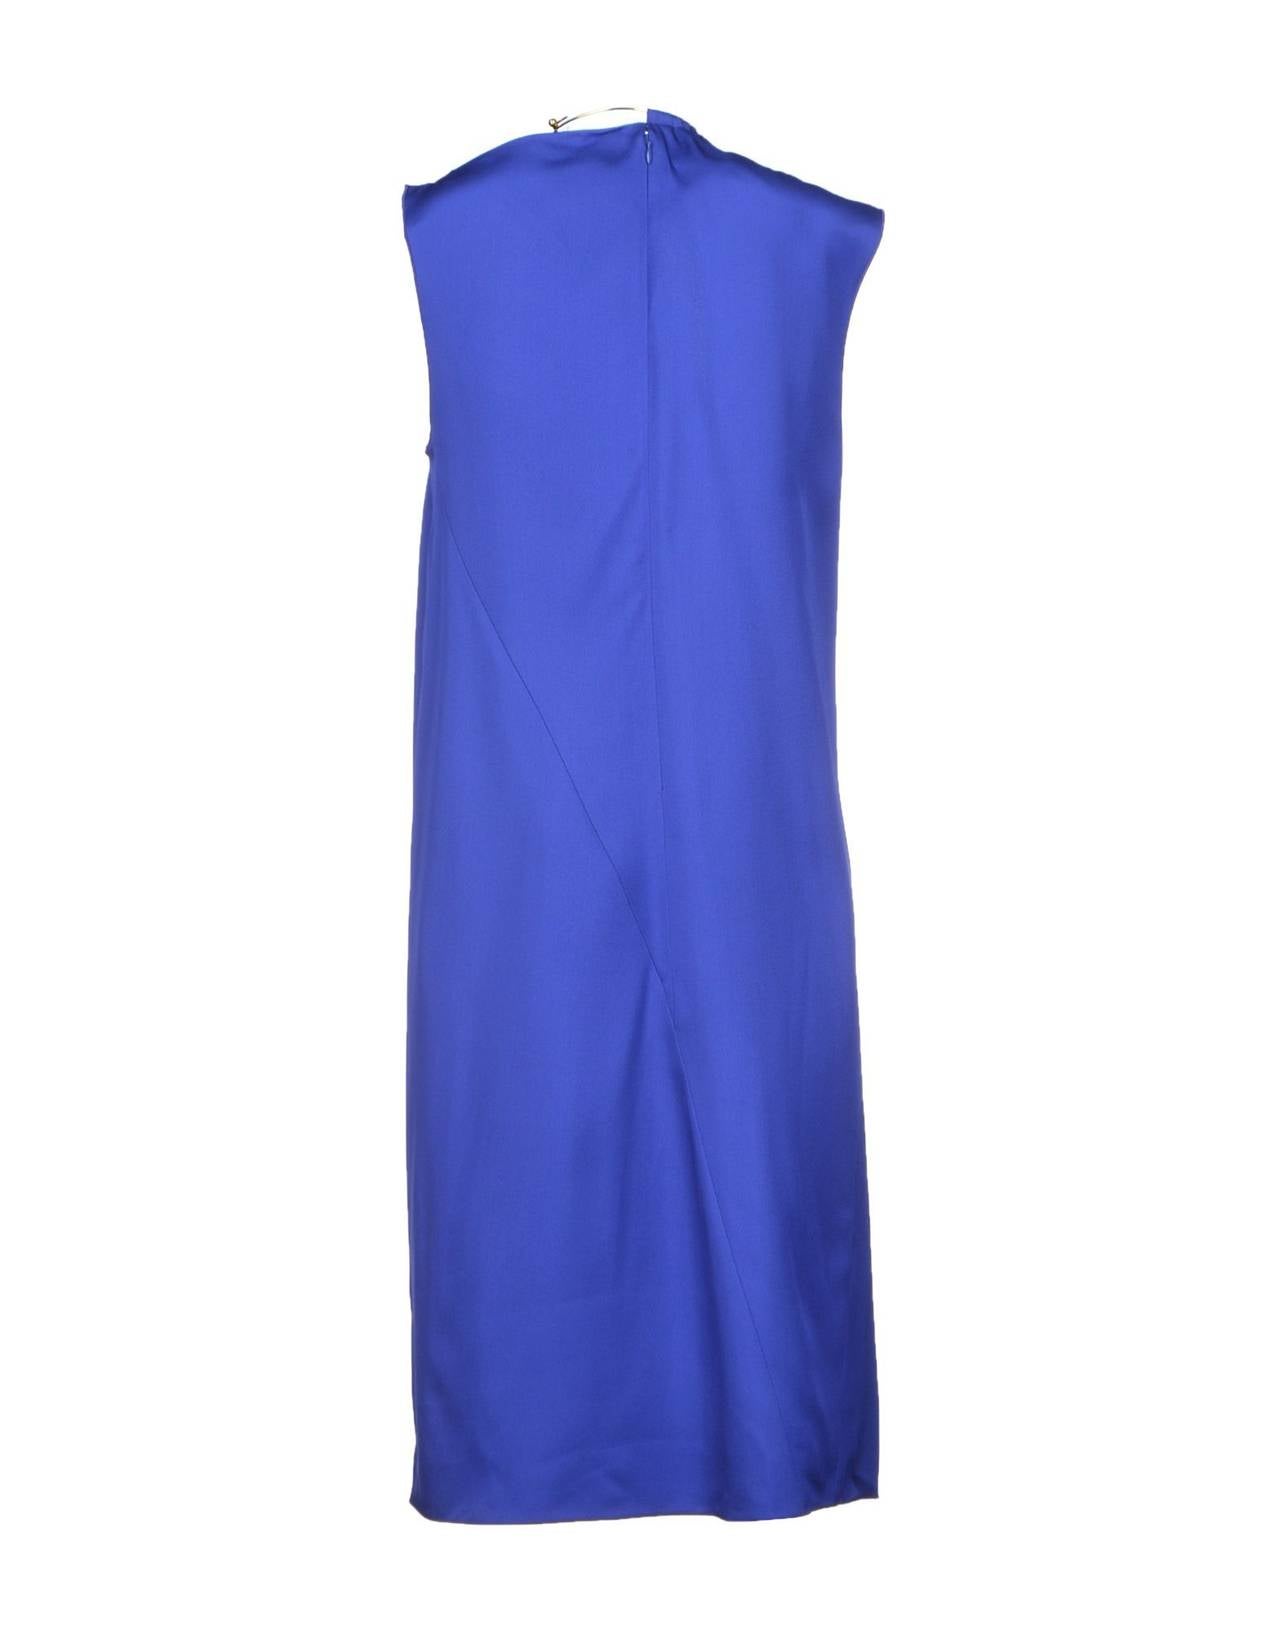 Excellent condition, CELINE by Phoebe Philo, contemporary, cerulean blue, shift dress with locking, metal wire-necklace hardware.

'V'-shaped, cut-out design at wearer's right front neck, and left side neck.

Angled seam construction with